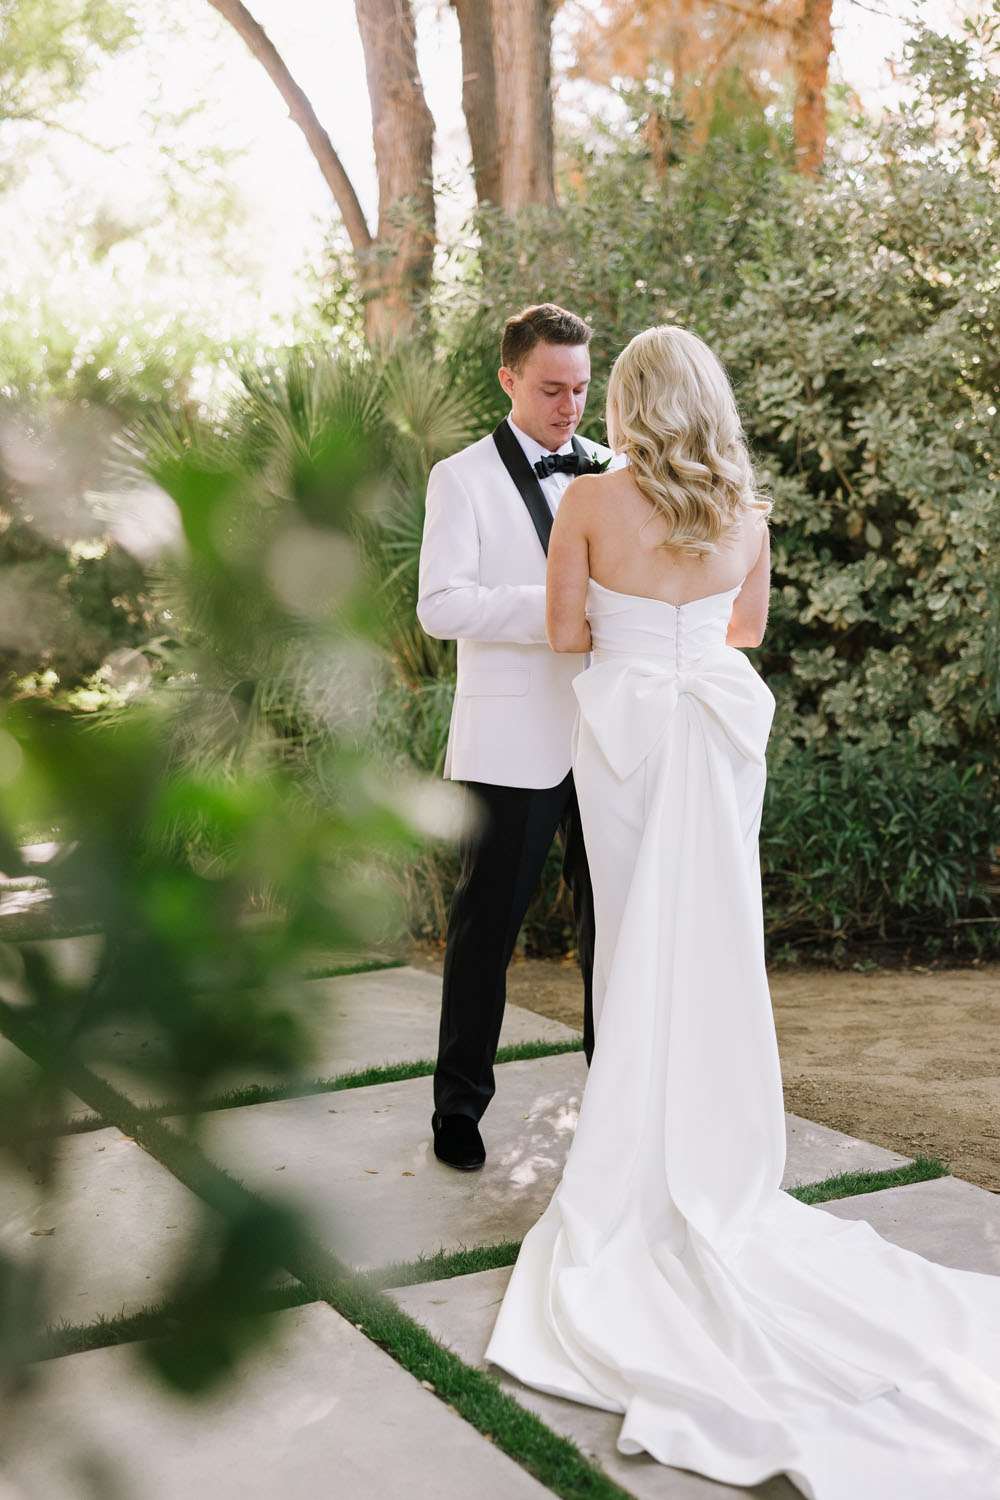 Bride and groom's first look at Parker Palm Springs hotel wedding